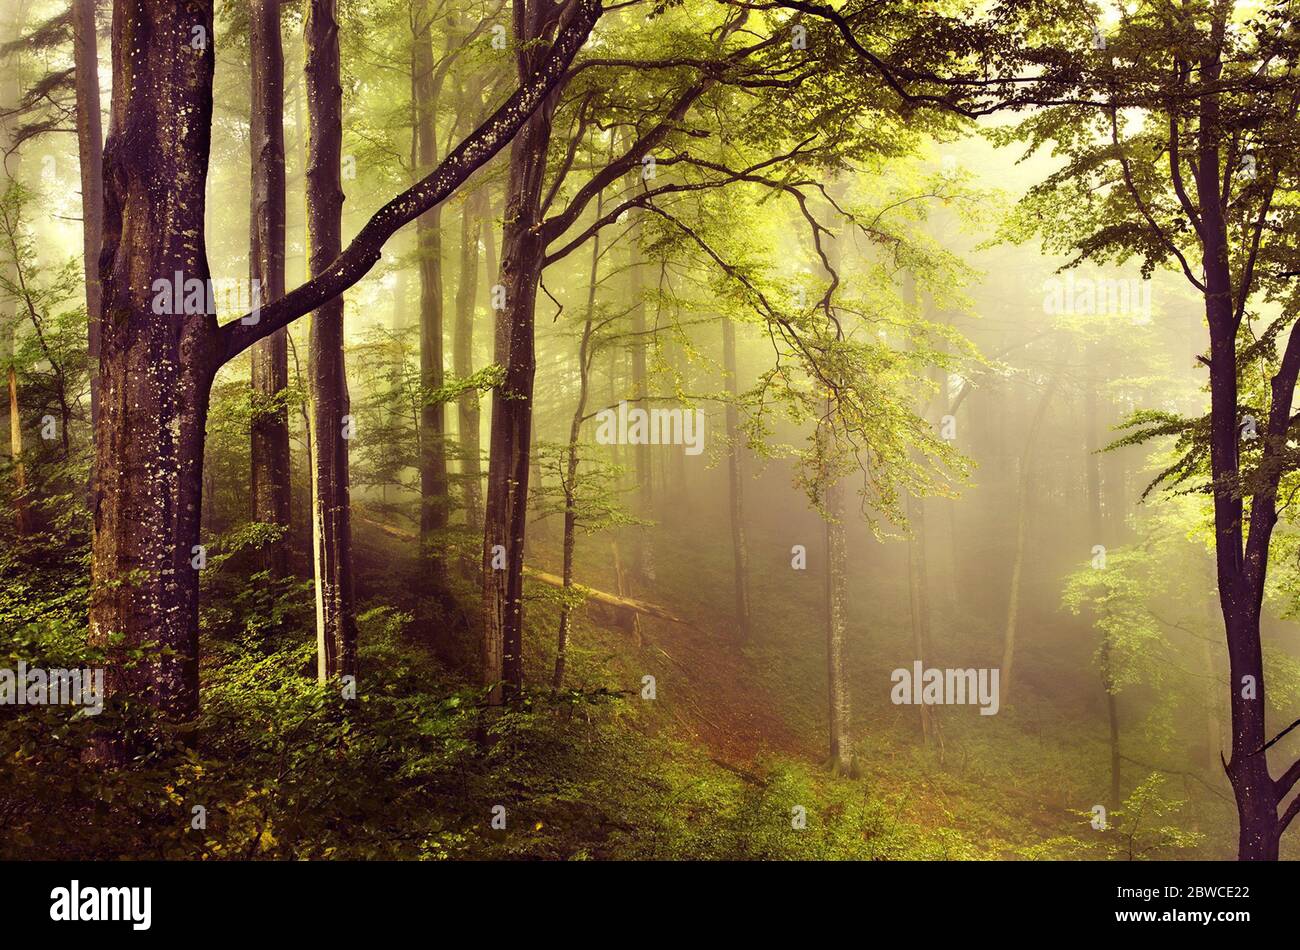 Misty forest trees whith hi grade of humidity Stock Photo